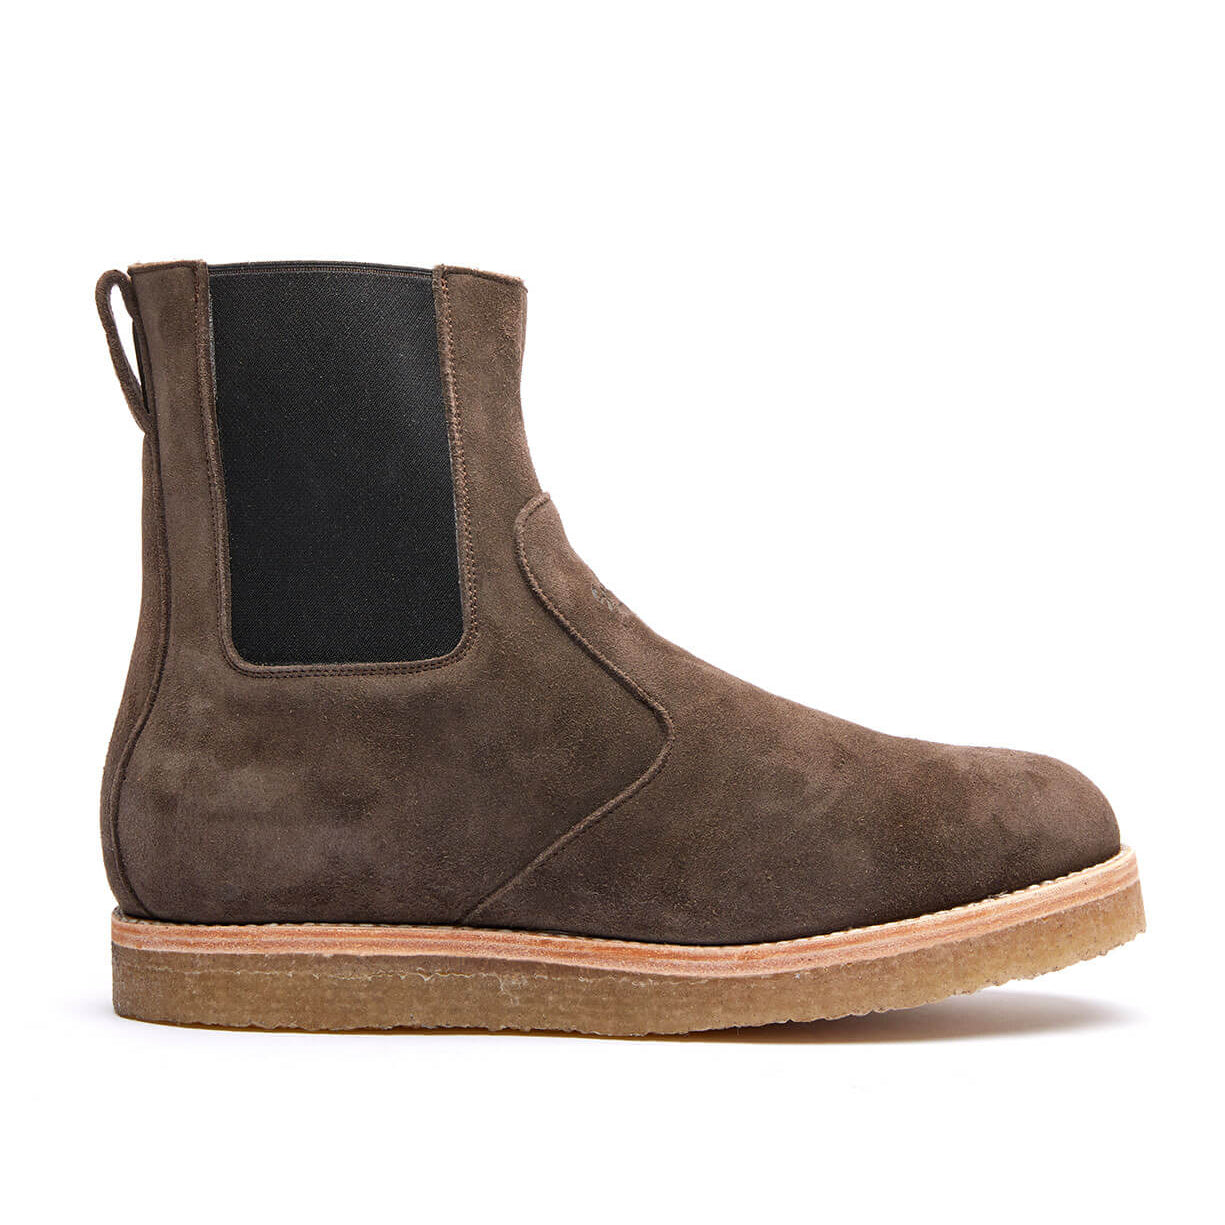 Santa Rosa Brand Stamford Boot: Brown suede Chelsea boot with elastic side panel and natural crepe outsole on a white background.